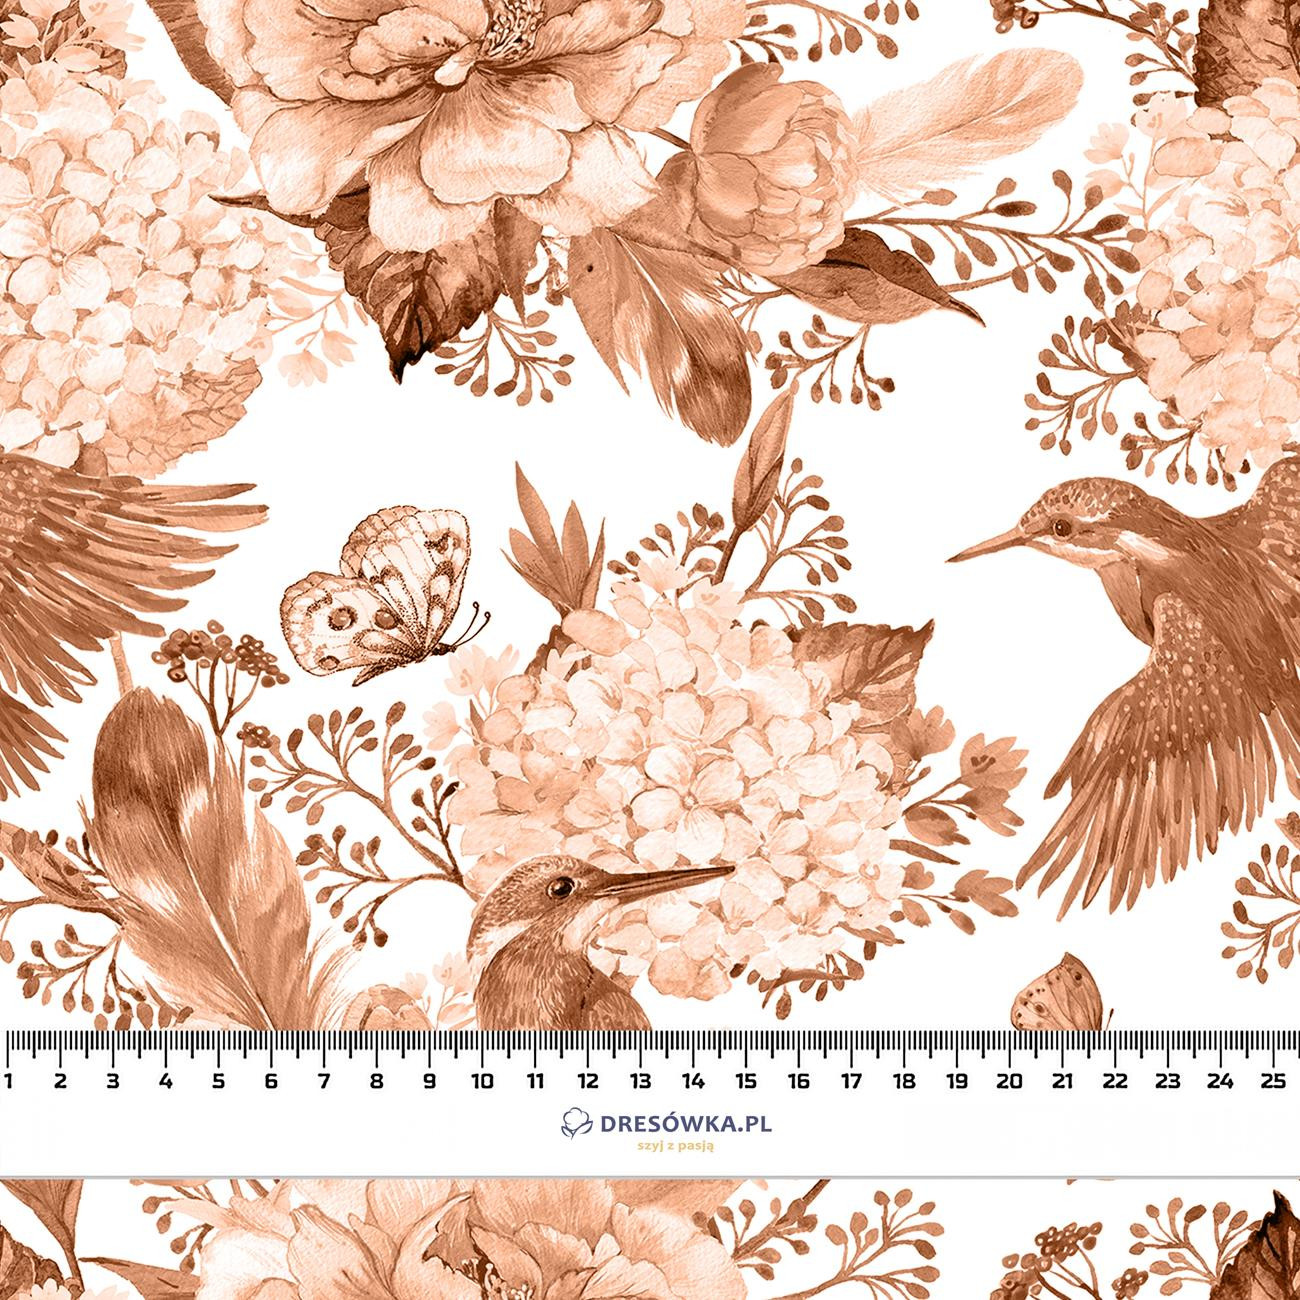 KINGFISHERS AND LILACS (KINGFISHERS IN THE MEADOW) / peach fuzz - quick-drying woven fabric